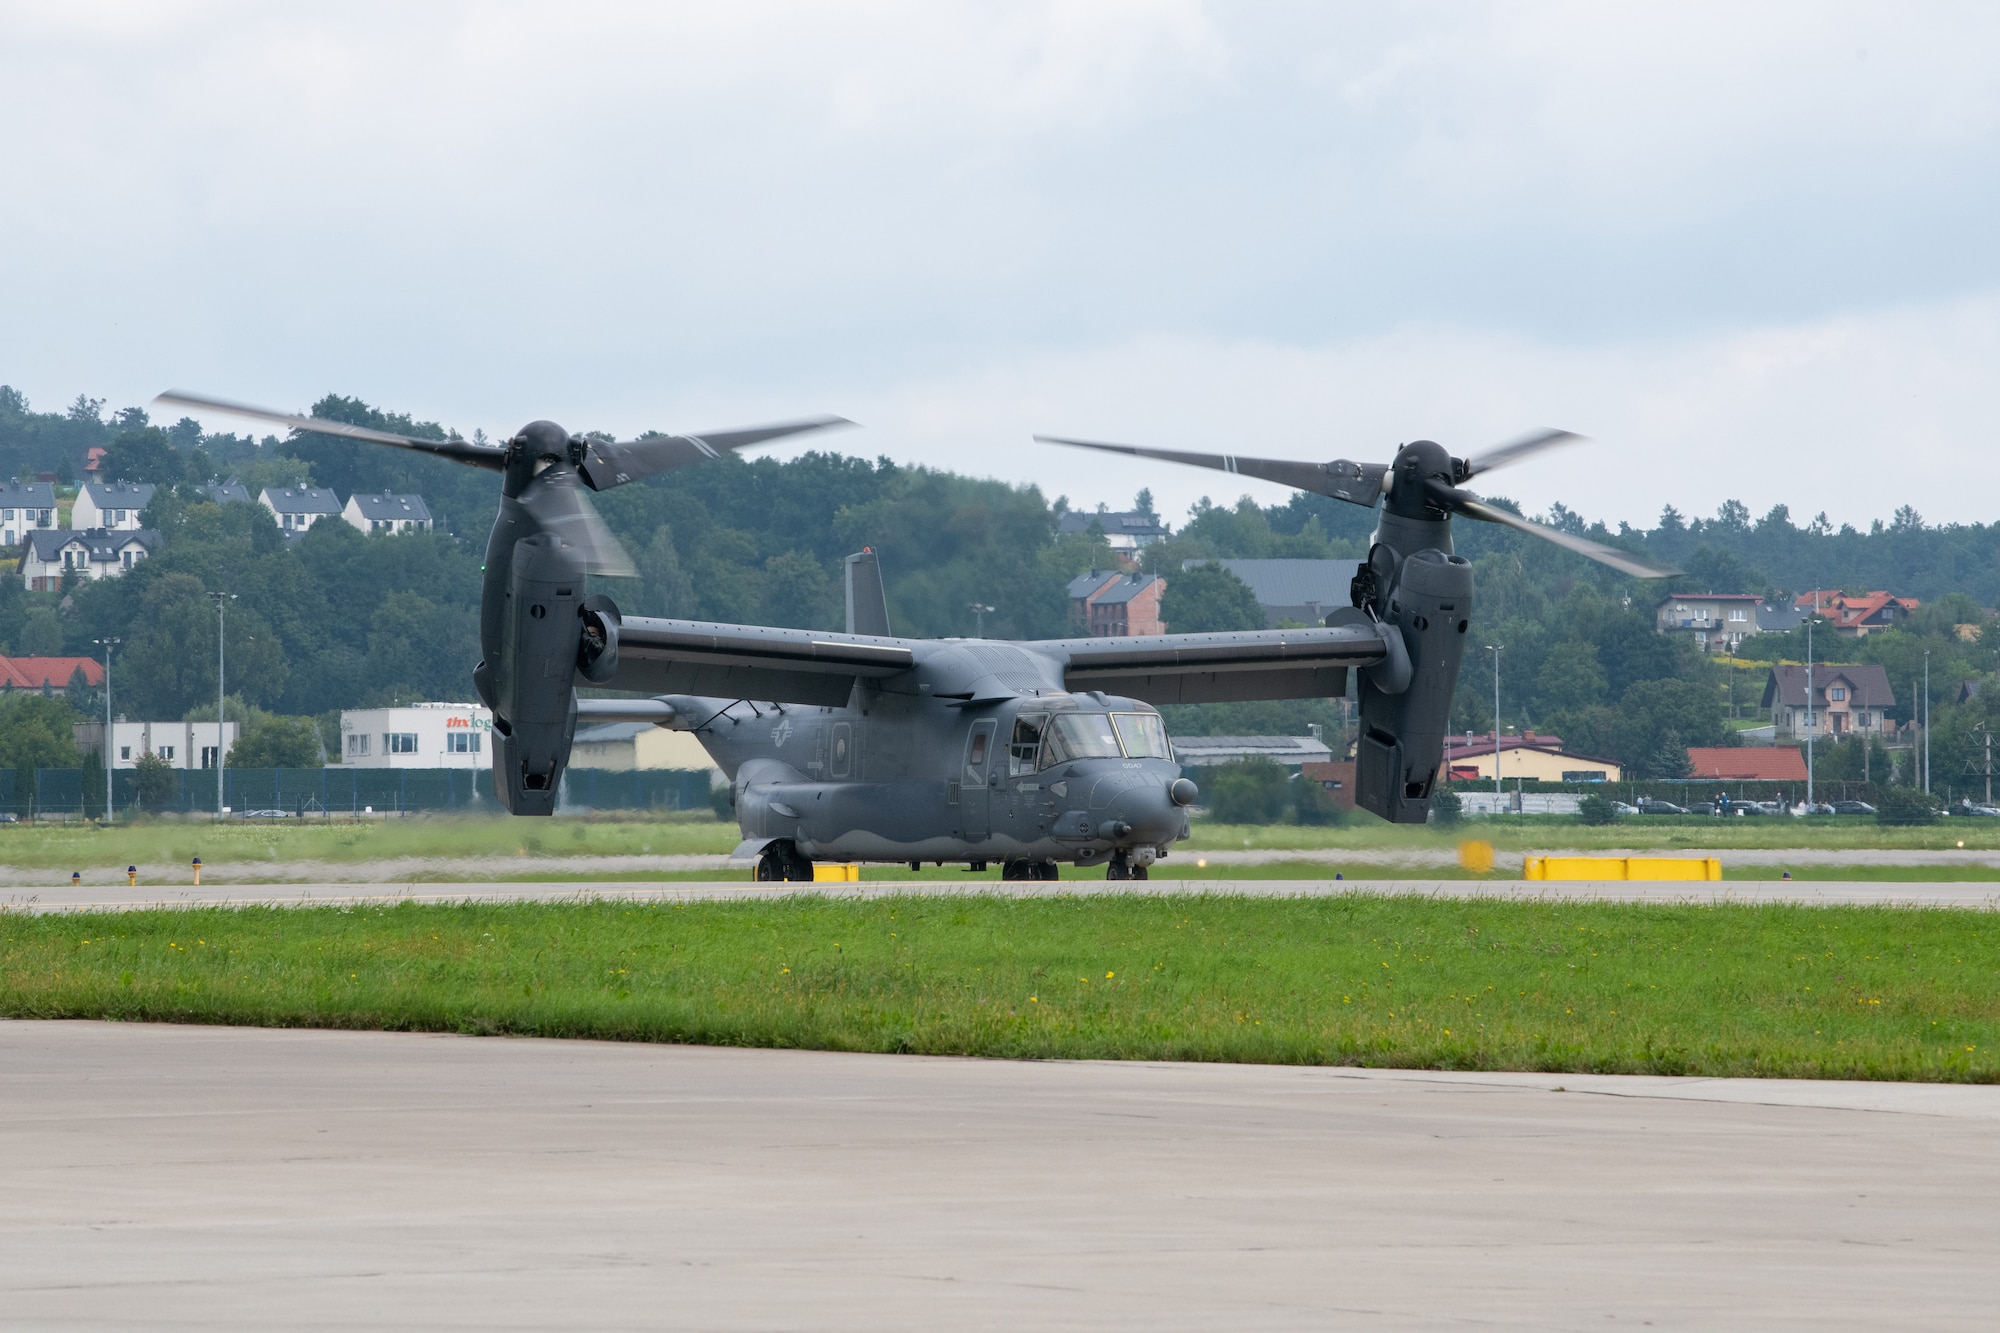 A CV-22B Osprey assigned to the 352d Special Operations Wing, lands to take part in the European Partnership Flight event during the Building Partner Aviation Capacity Seminar in Krakow, Poland, Sept. 1, 2021.